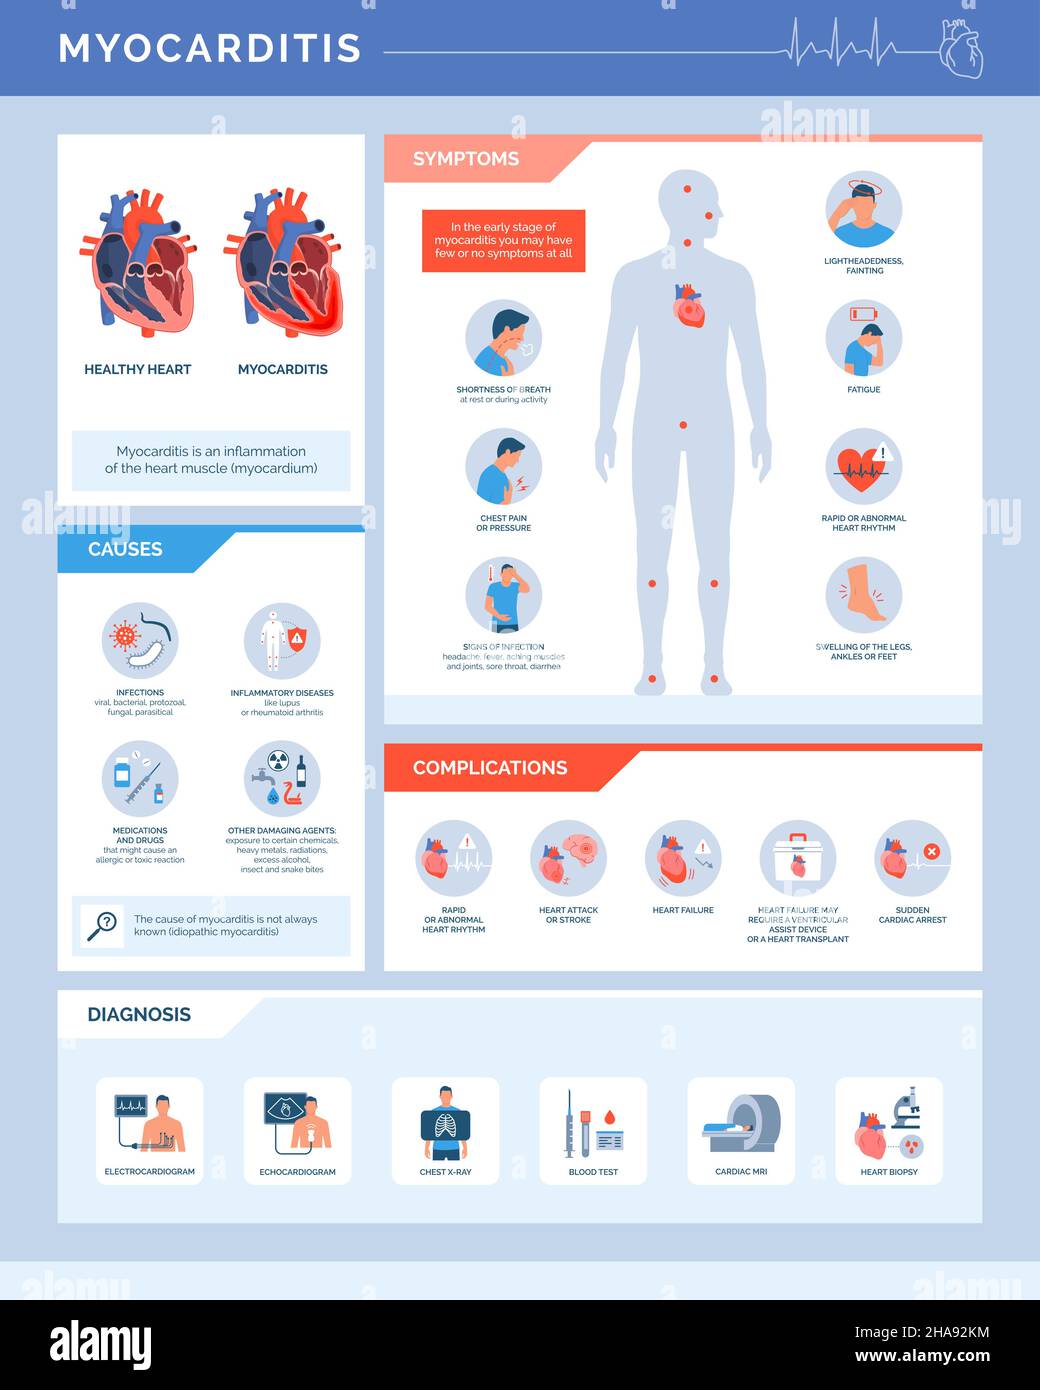 Myocarditis heart inflammation: causes, symptoms, complications and diagnosis, medical infographic with icons Stock Vector